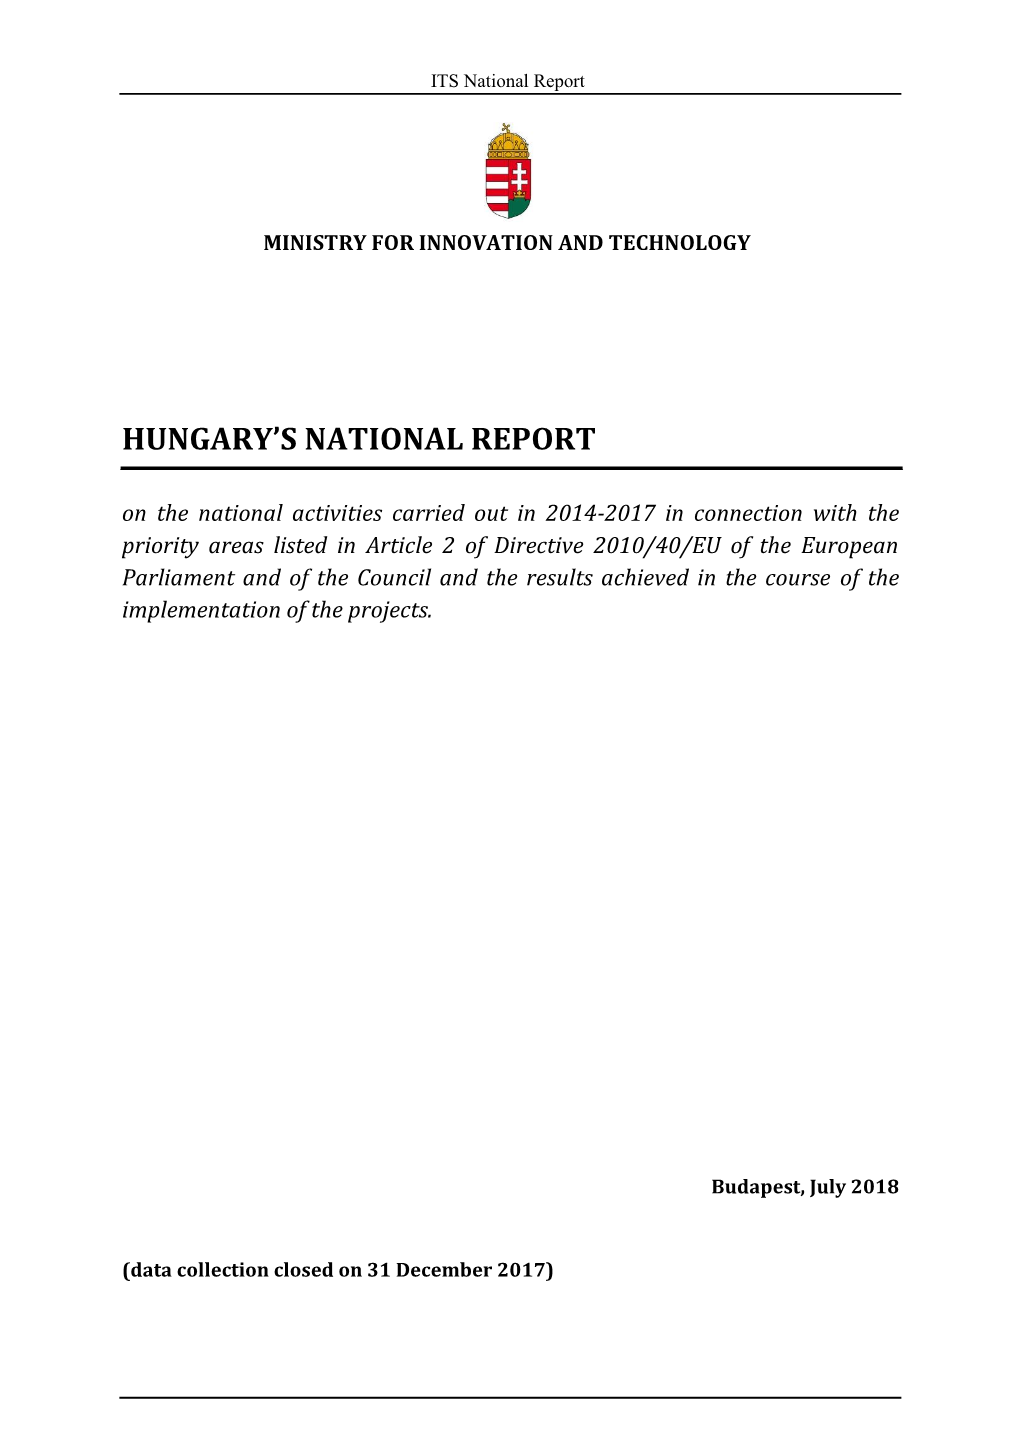 Hungary’S National Report